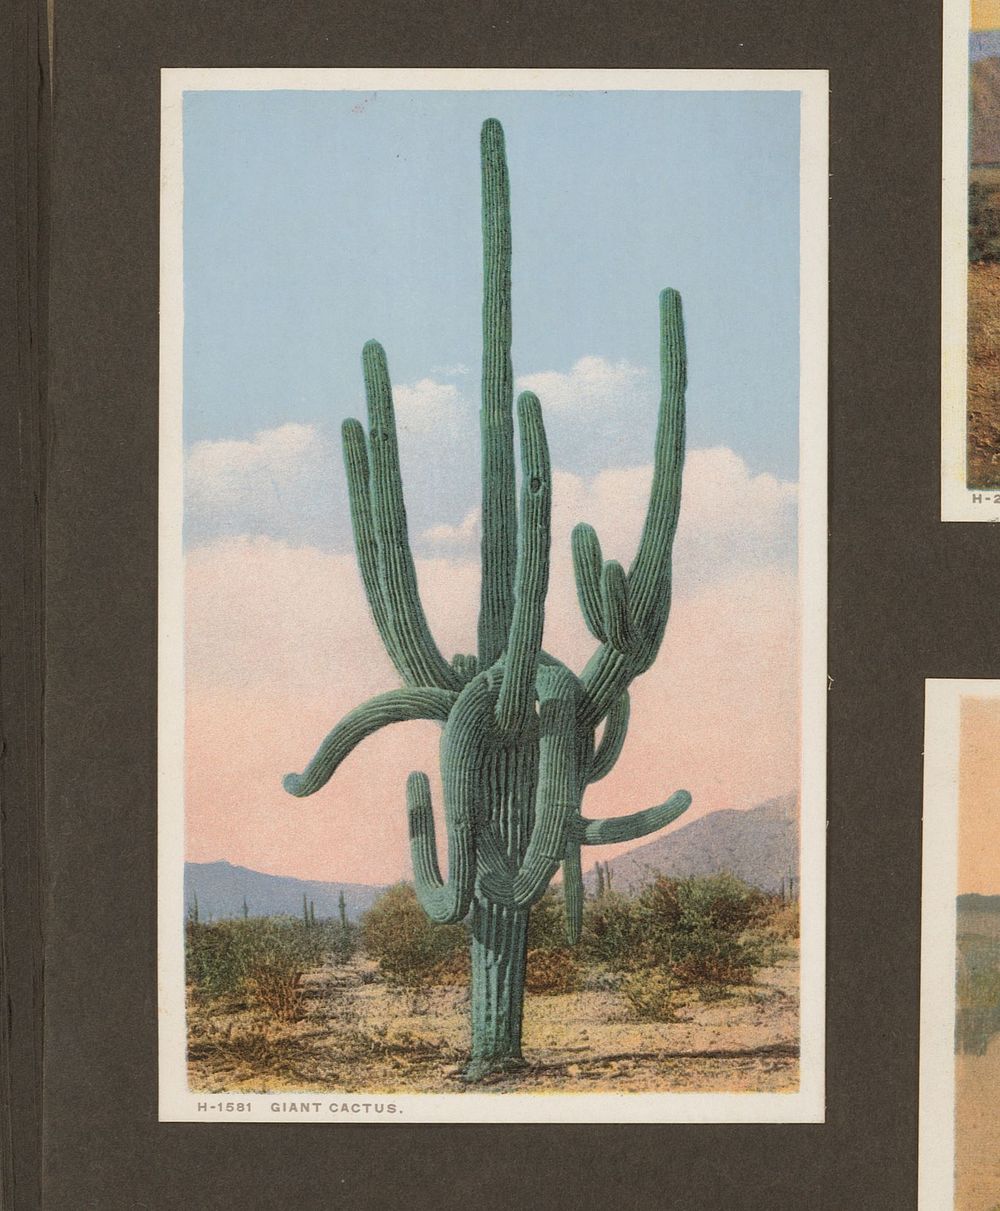 Giant cactus (c. 1928) by anonymous